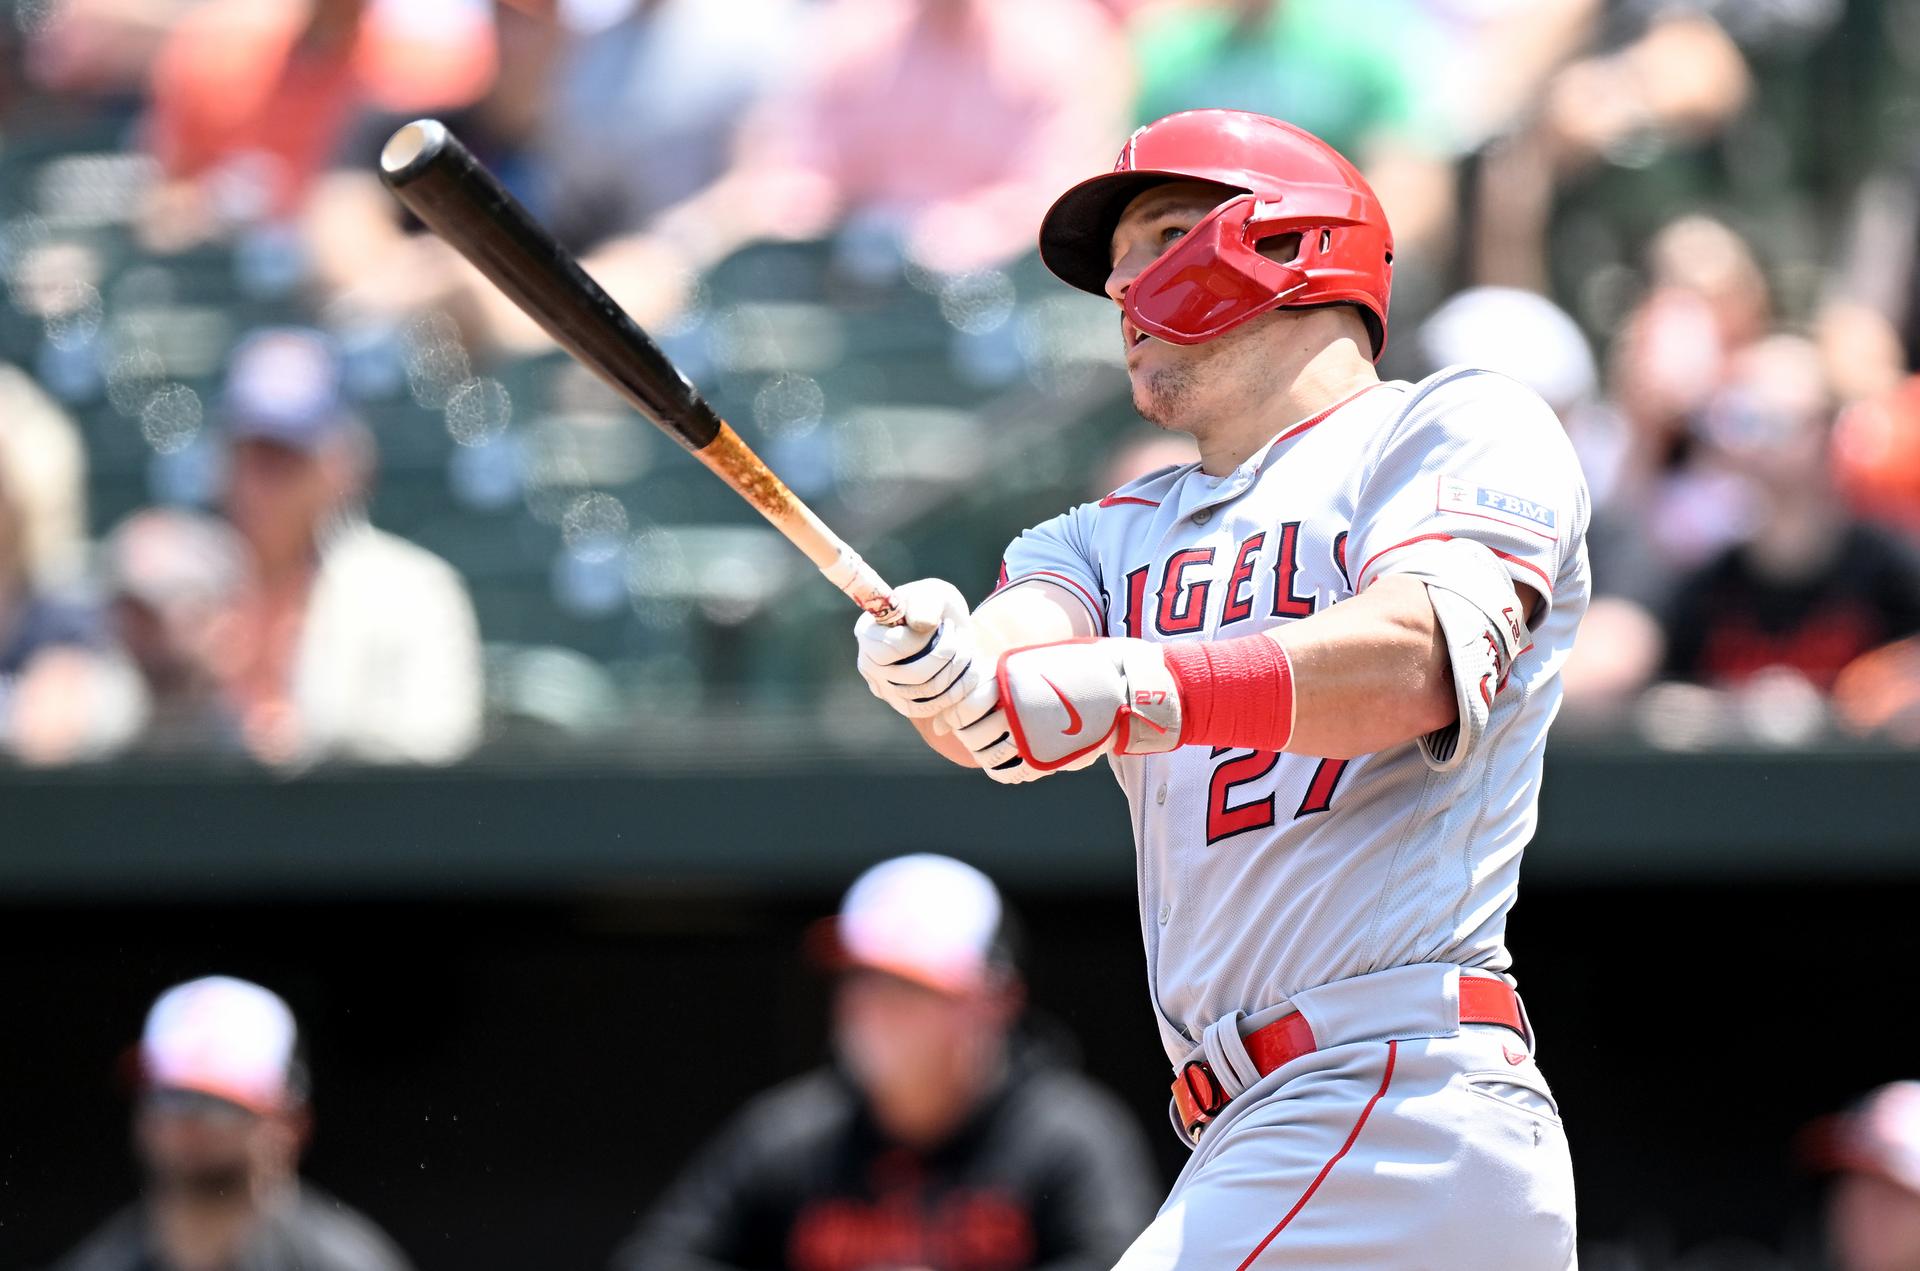 Mike Trout swinging